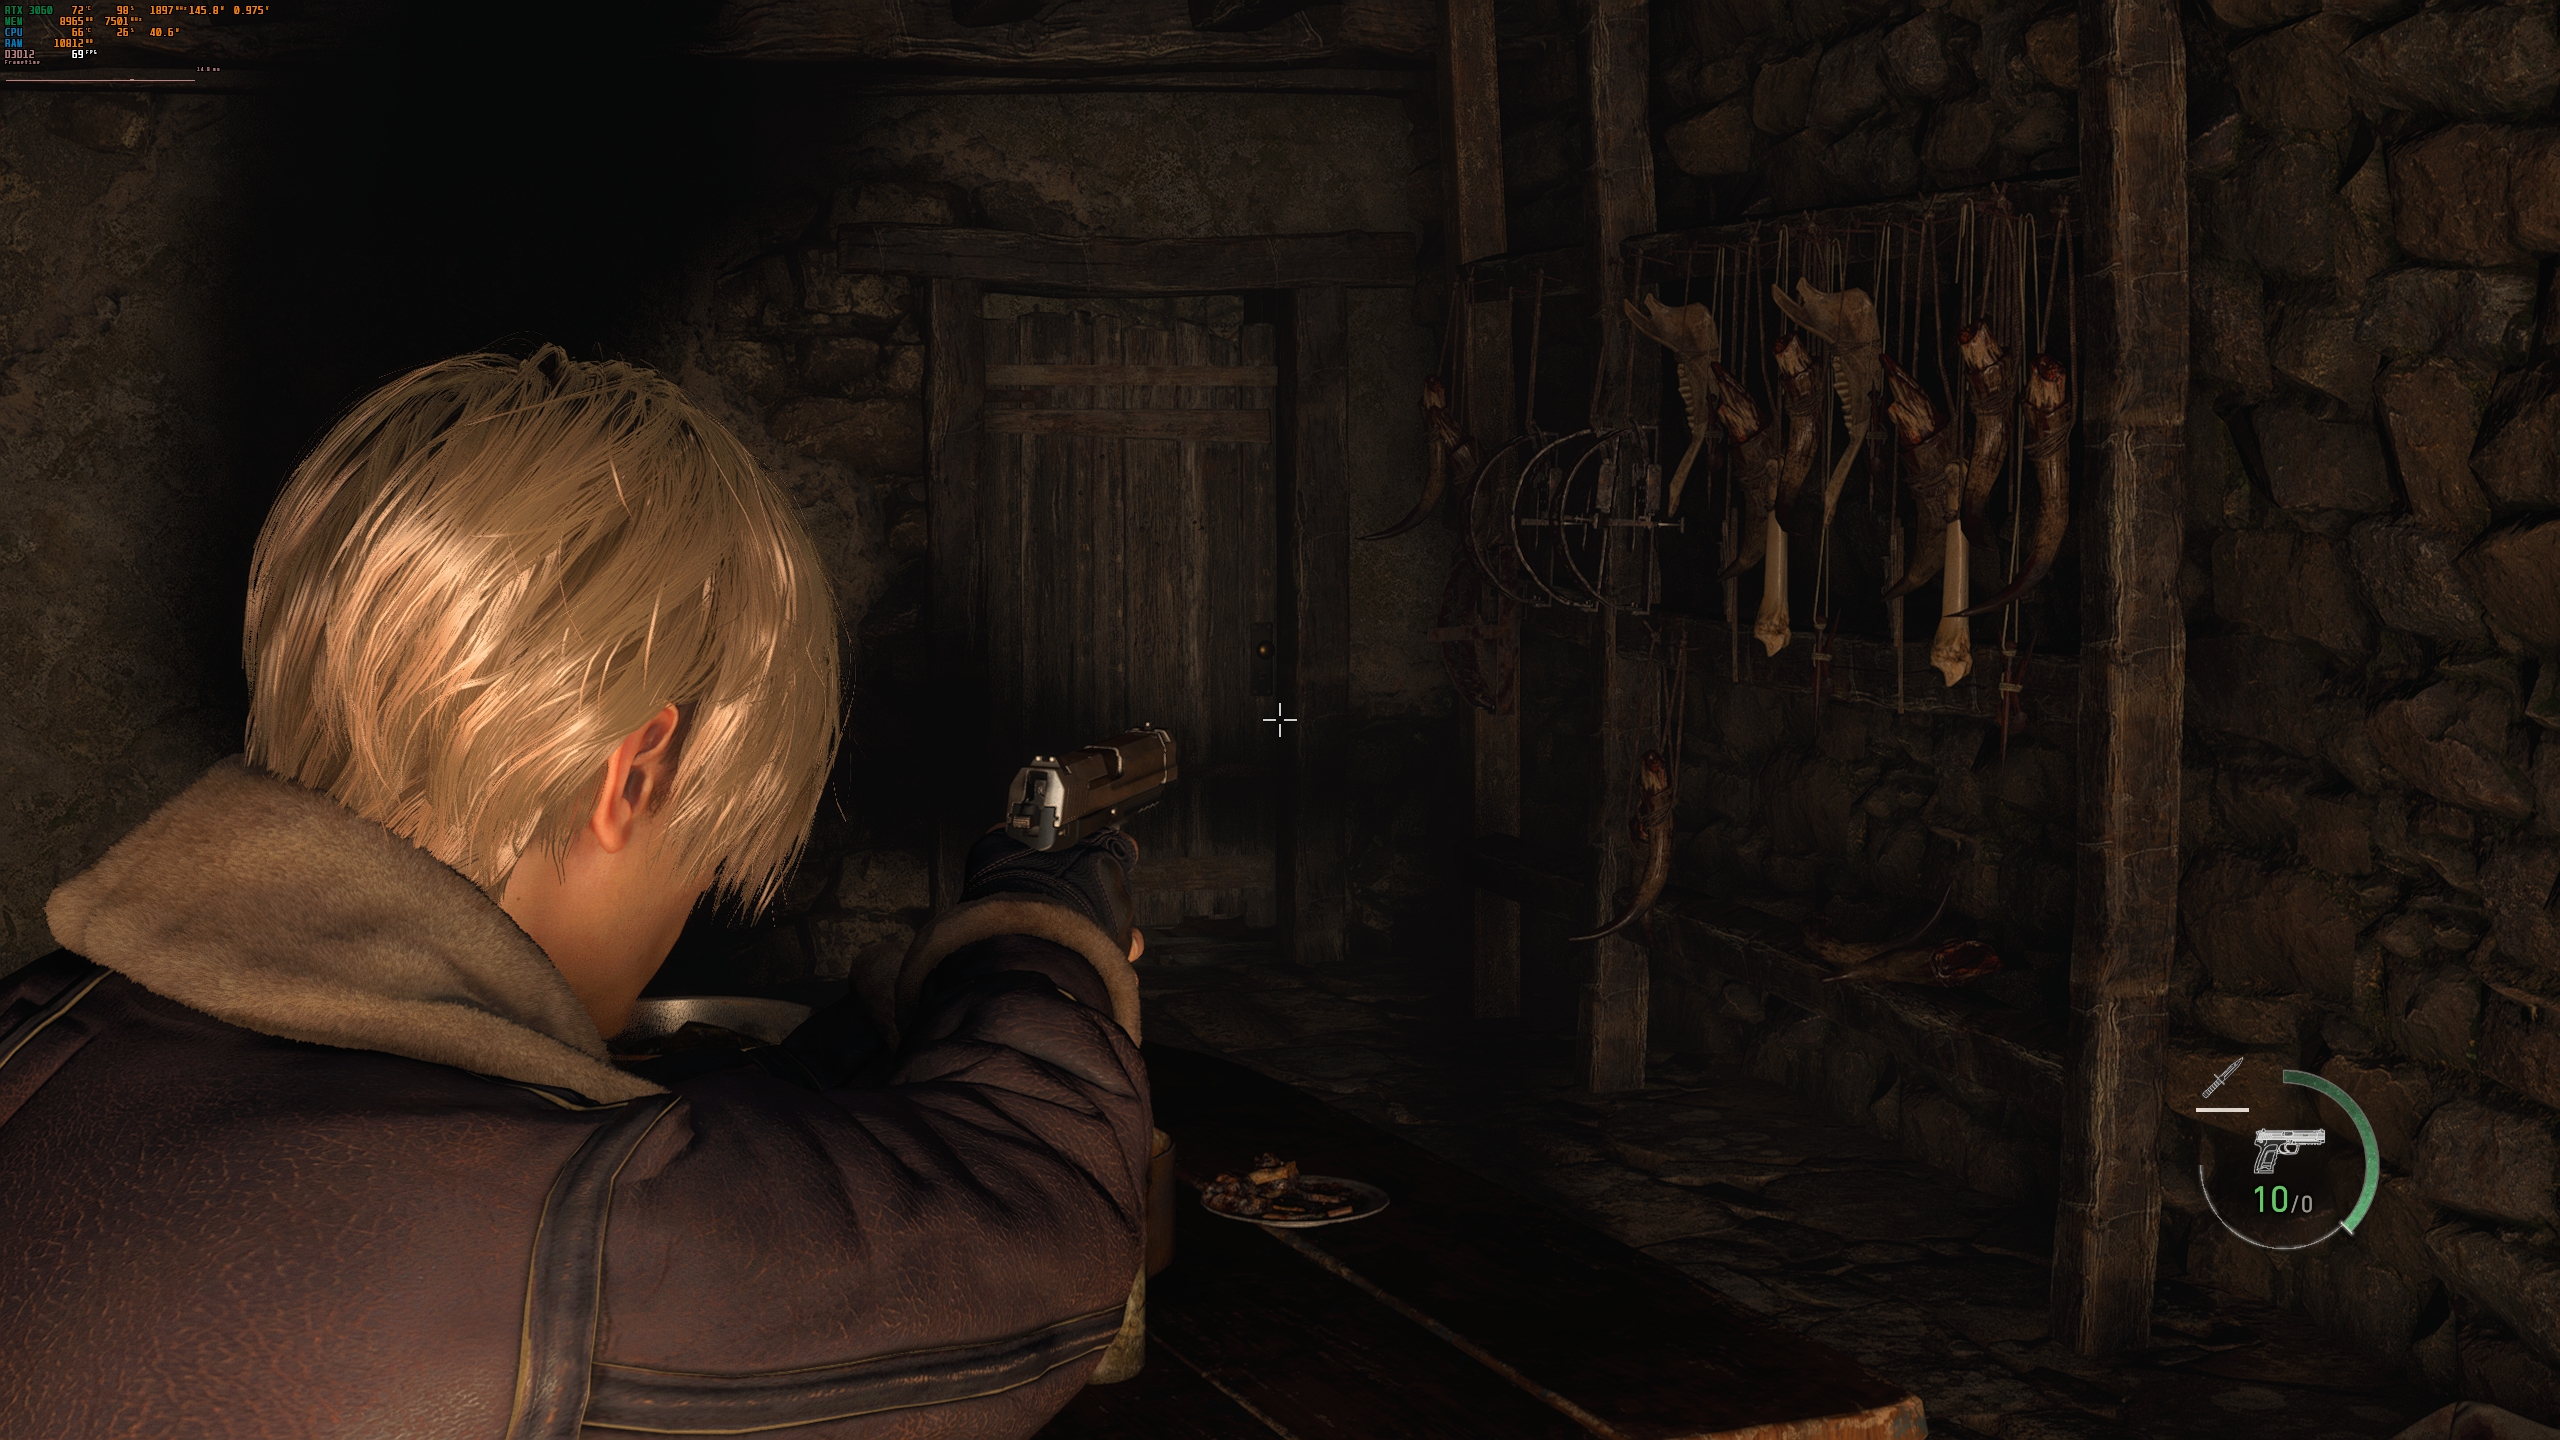 PS5 Resident Evil 4 Graphics - This isn't displayed correctly in 1944p or  what it is? There is something strange going on with the rendering. This  game is too good with it's